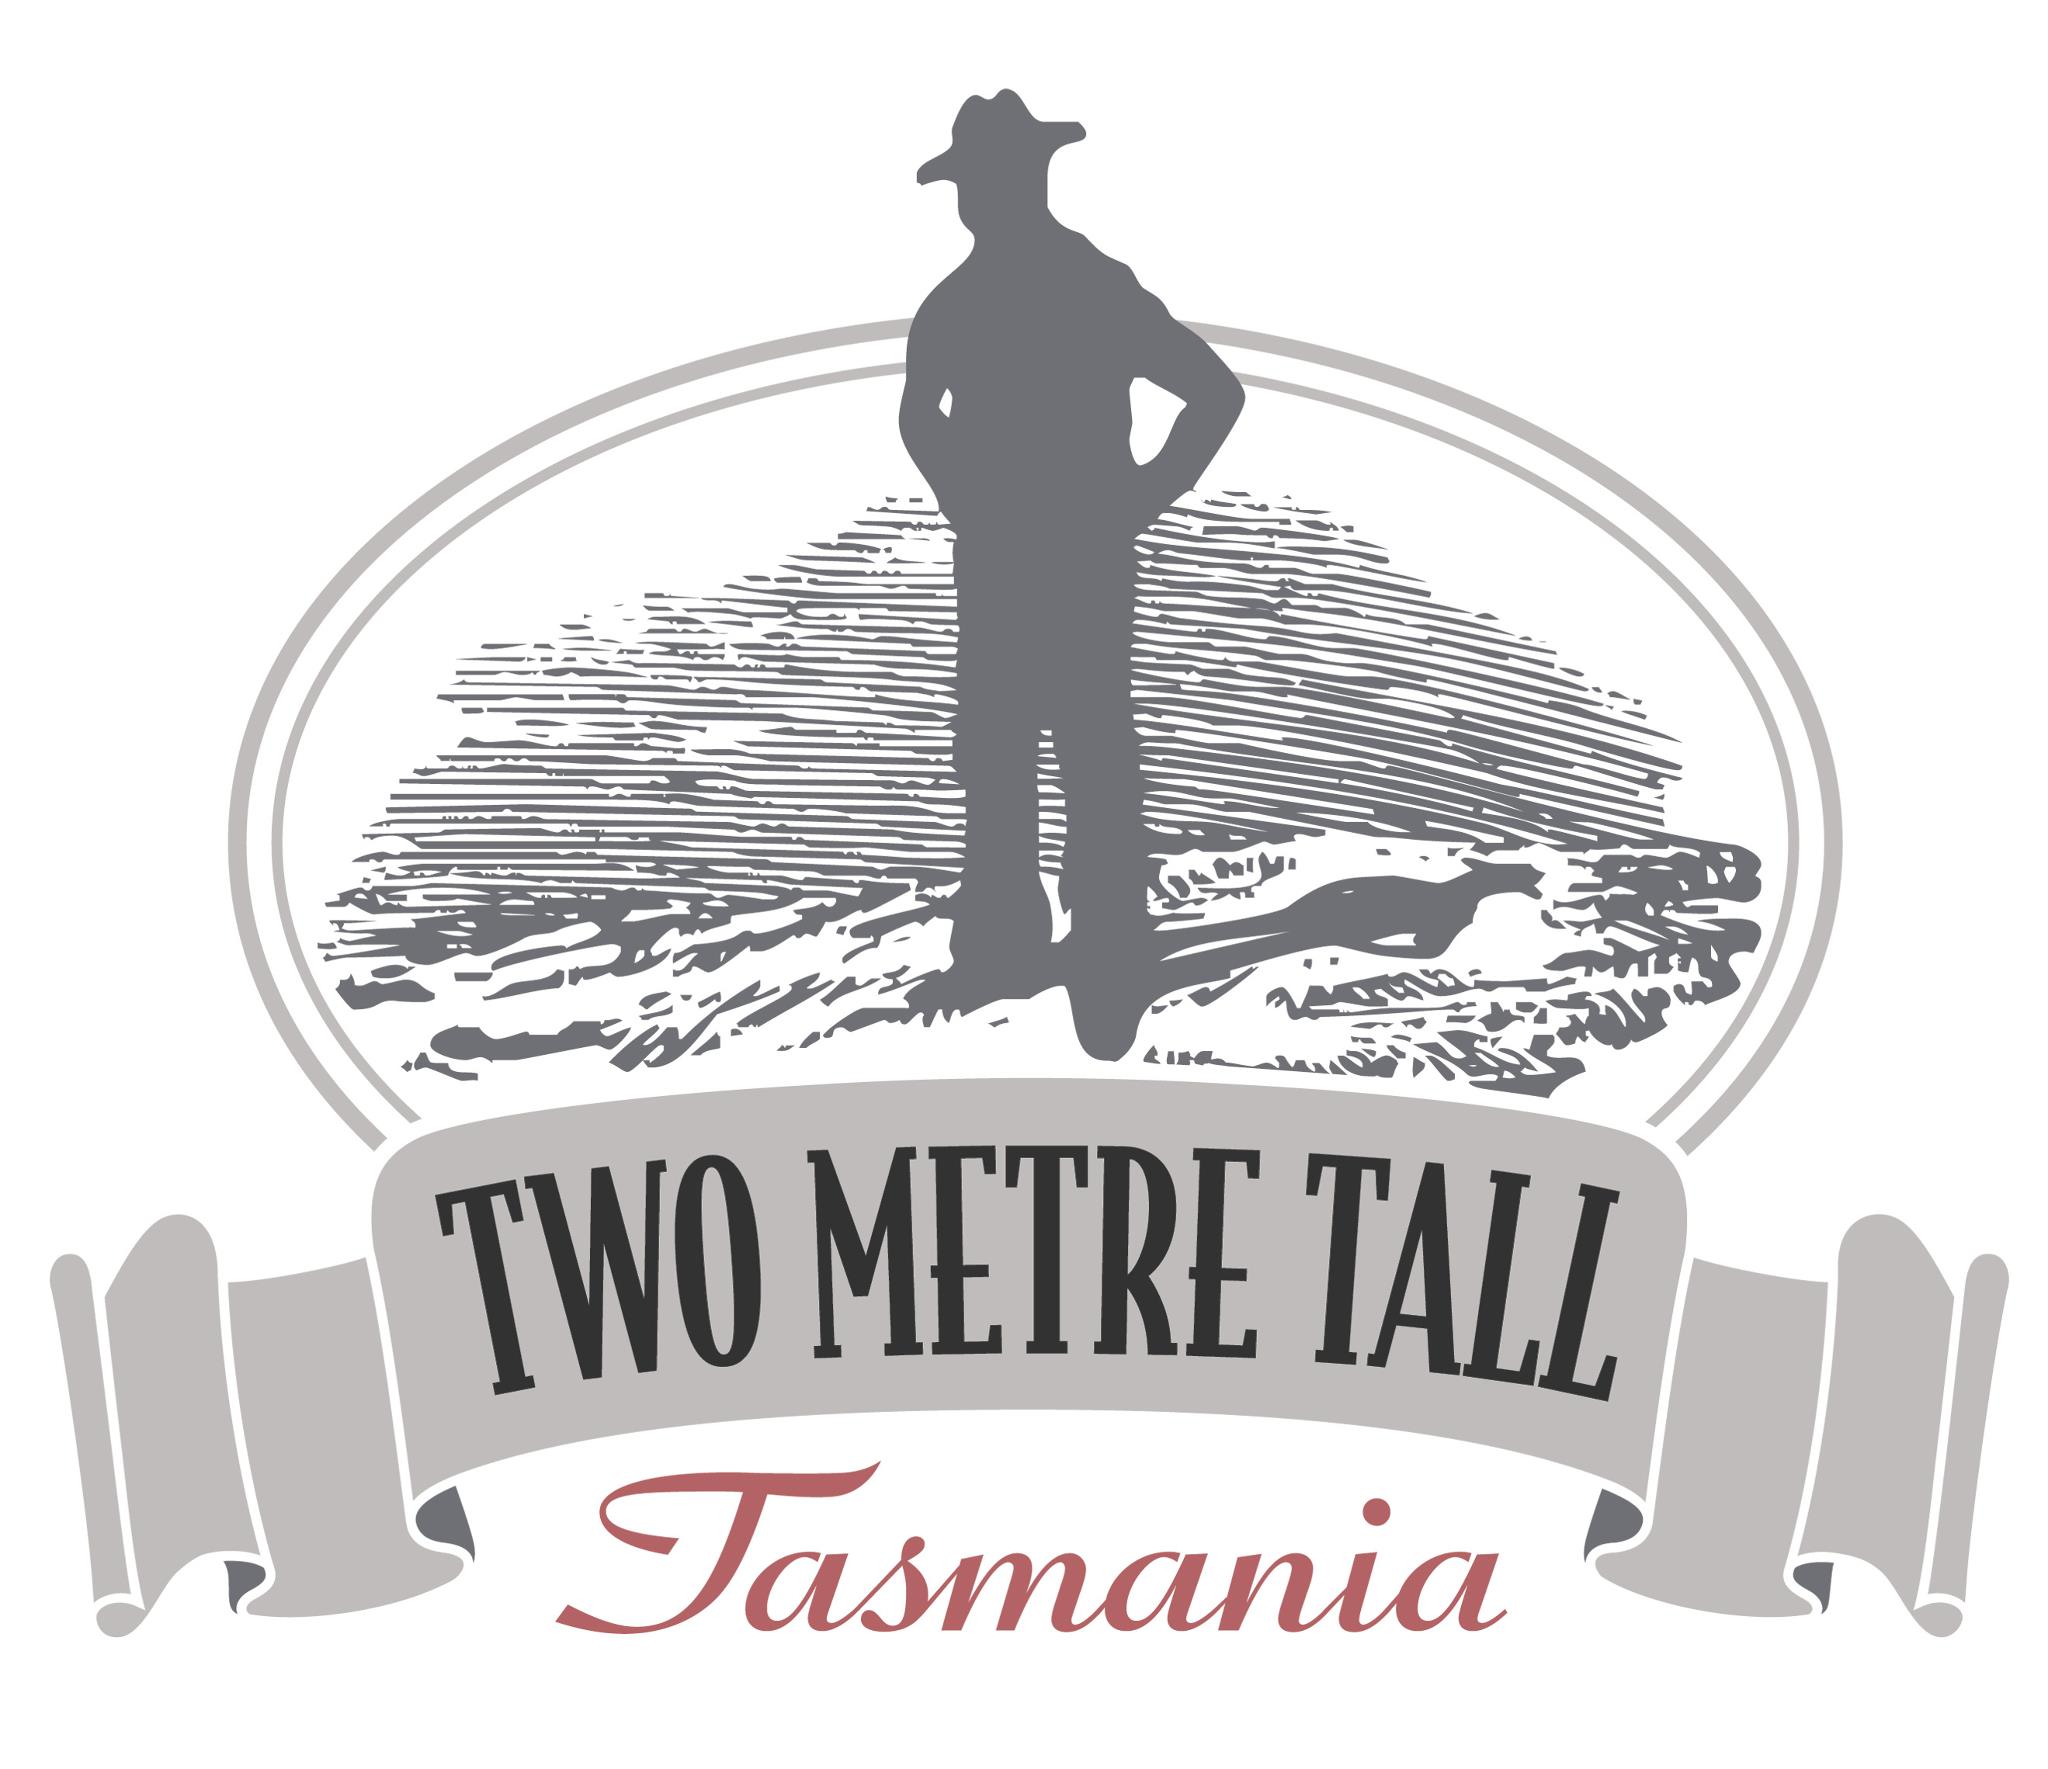 Two Metre Tall Brewery